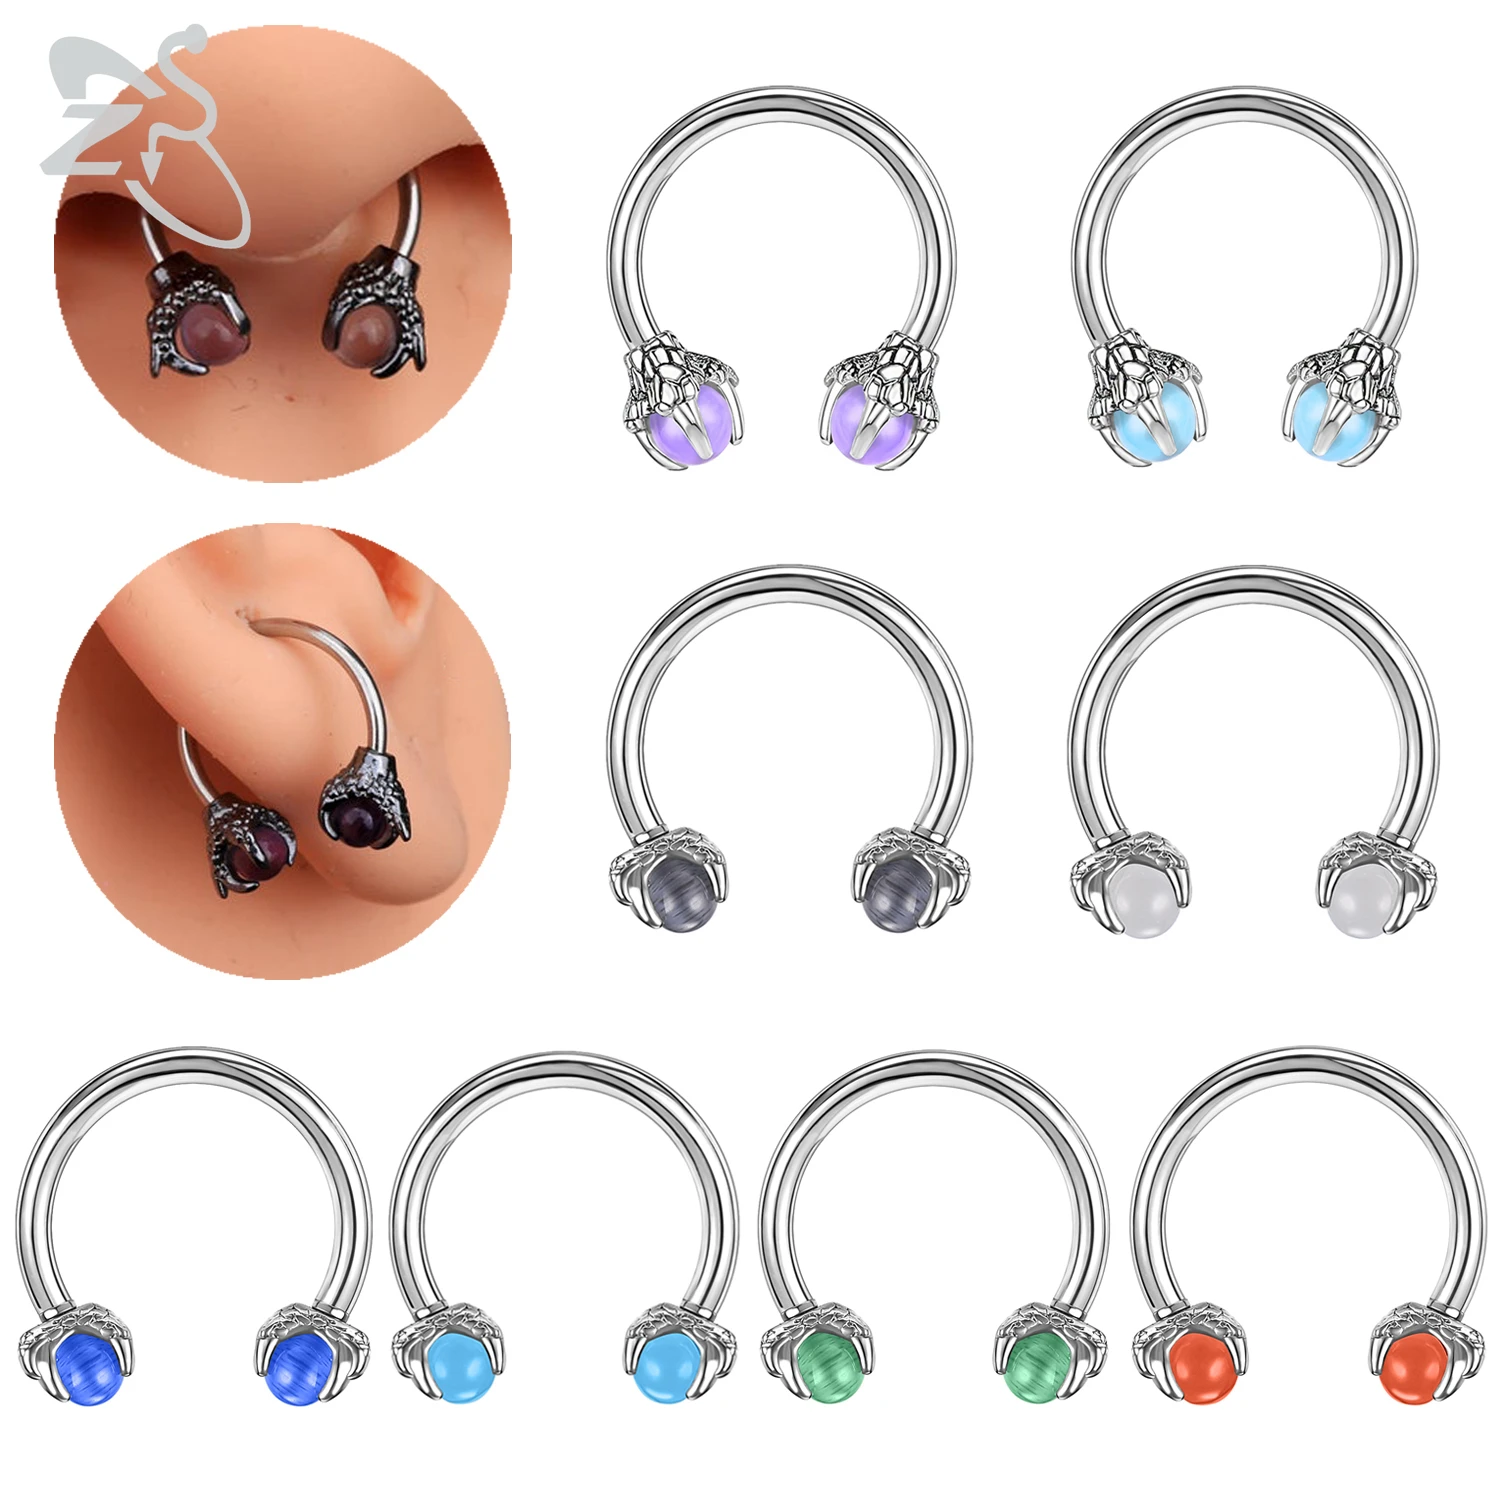 

ZS 1 Piece Horseshoe Shape Dragon Claw Nose Ring 16G Stainless Steel Septum Piercings Punk Helix Cartilage Tragus Daith Earrings